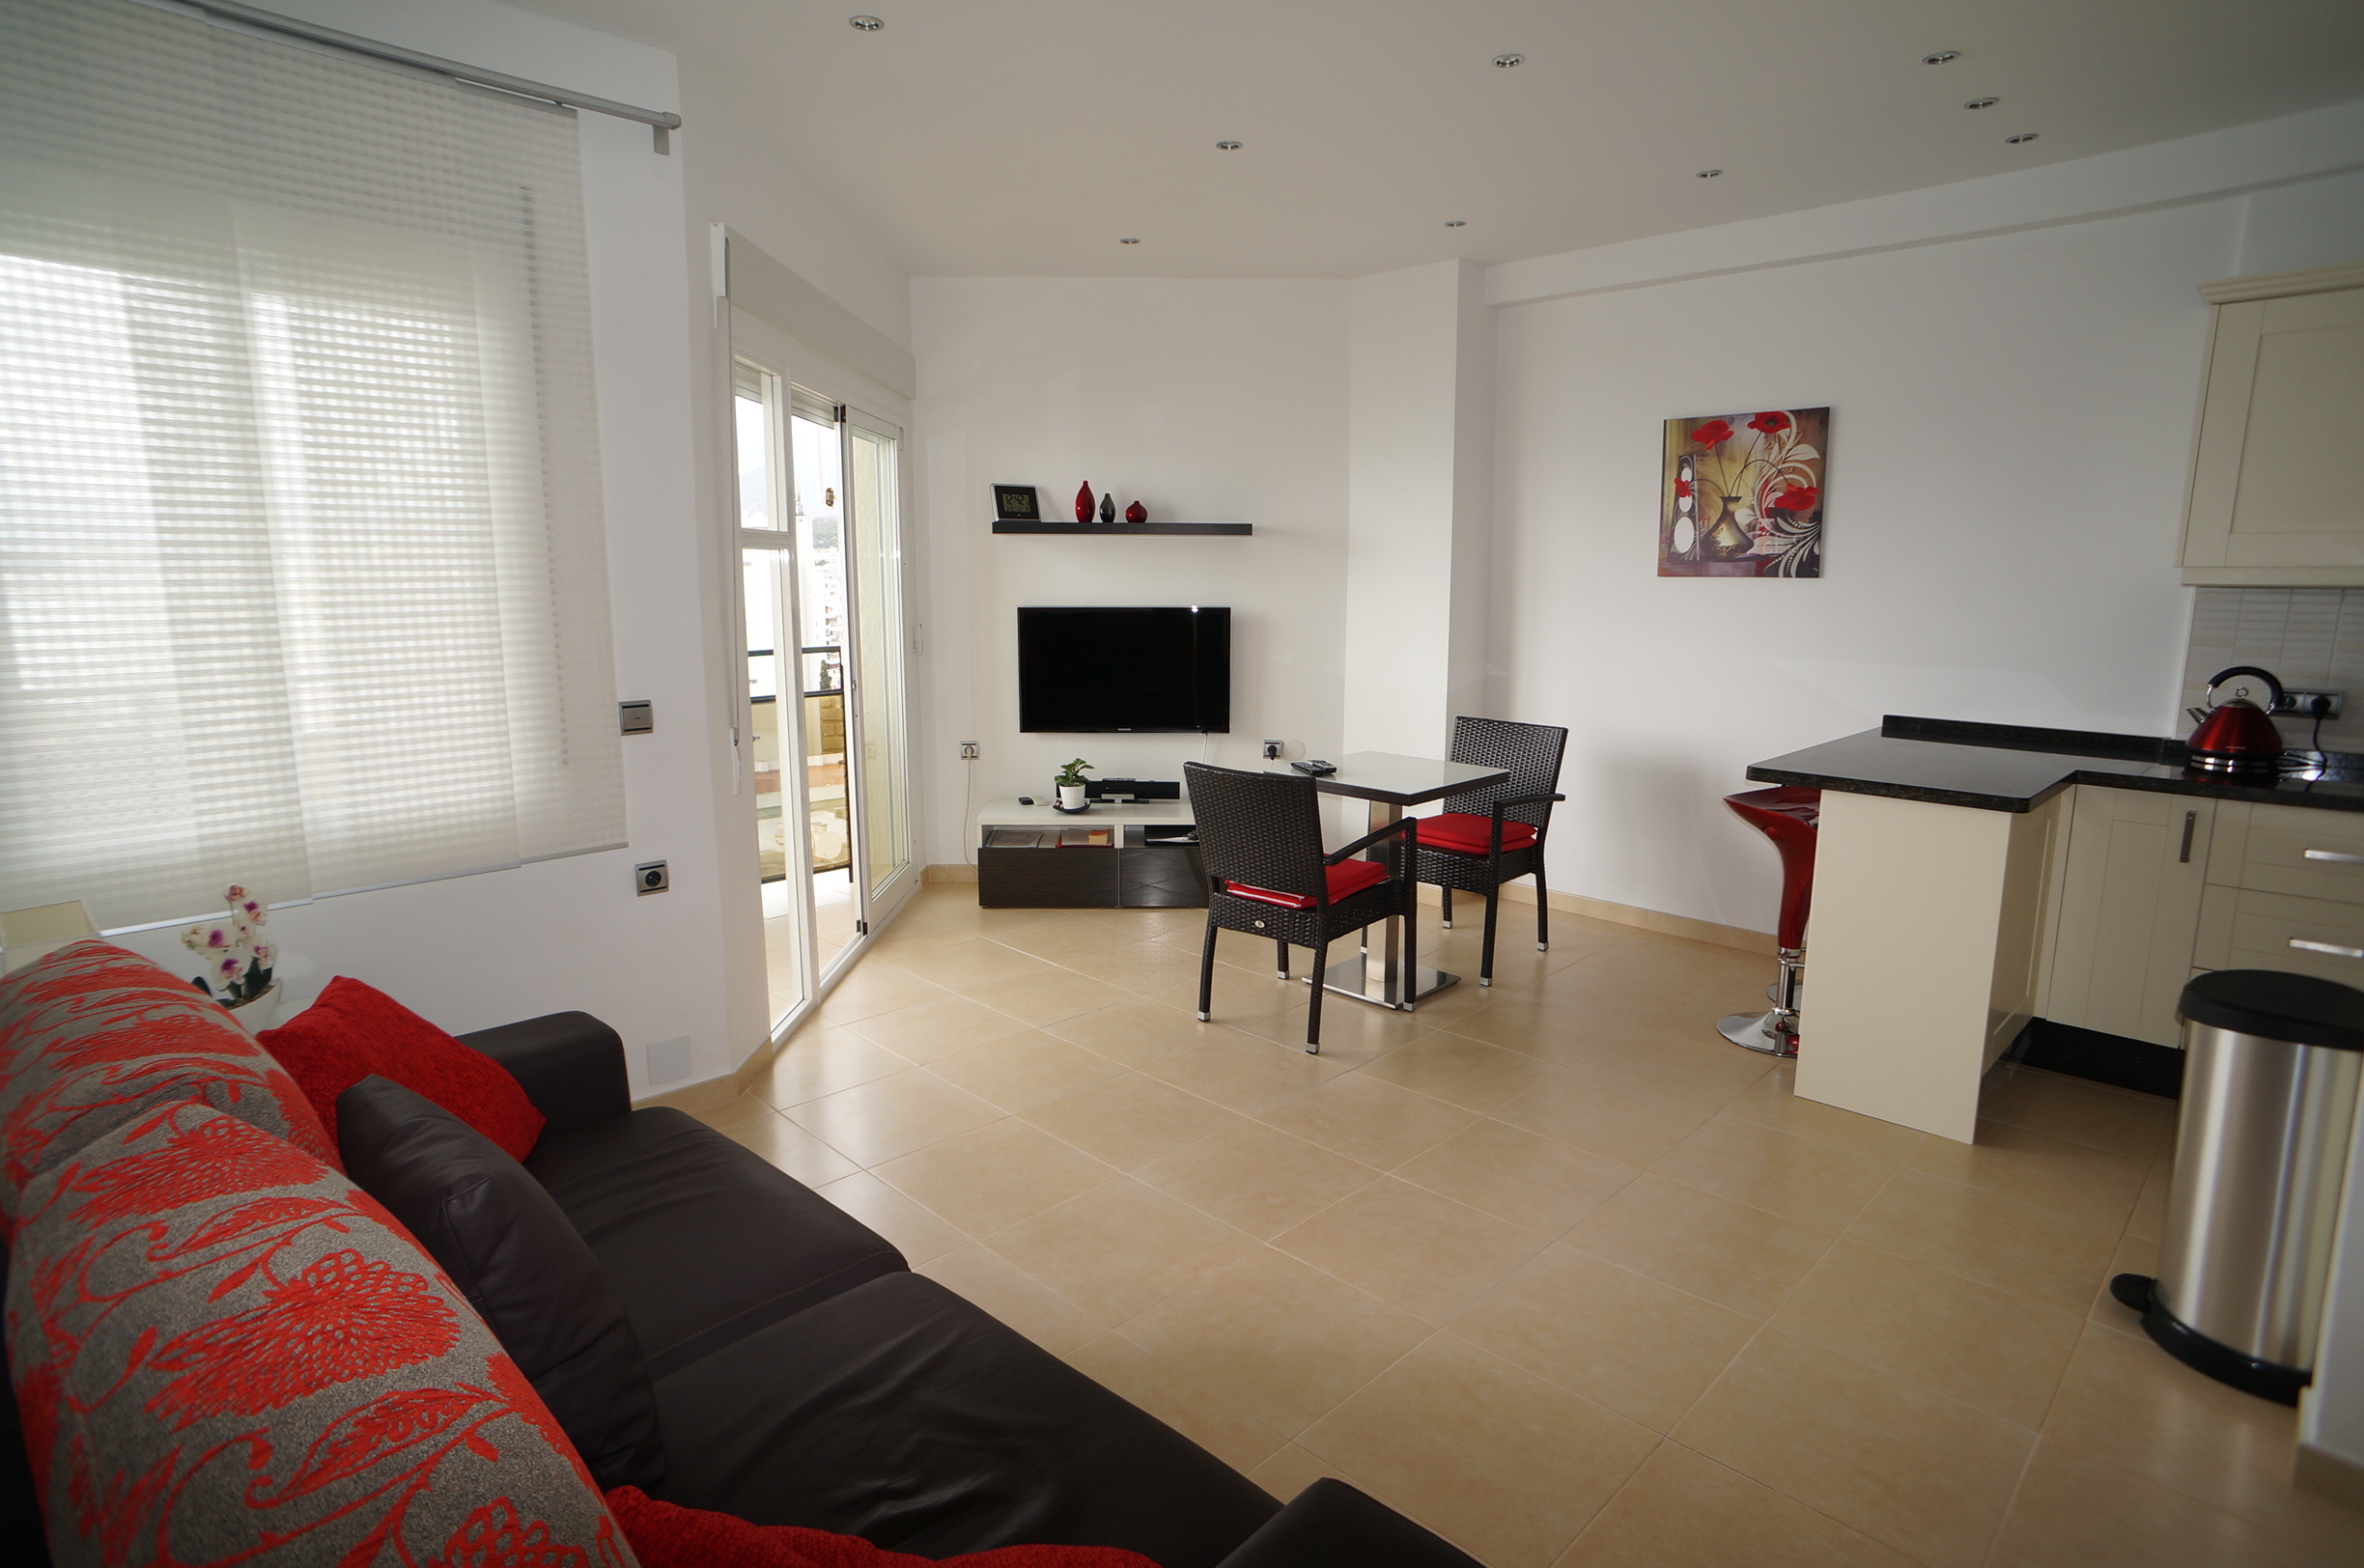 Skol apartments, Marbella - apartment 811A - lounge and dining area